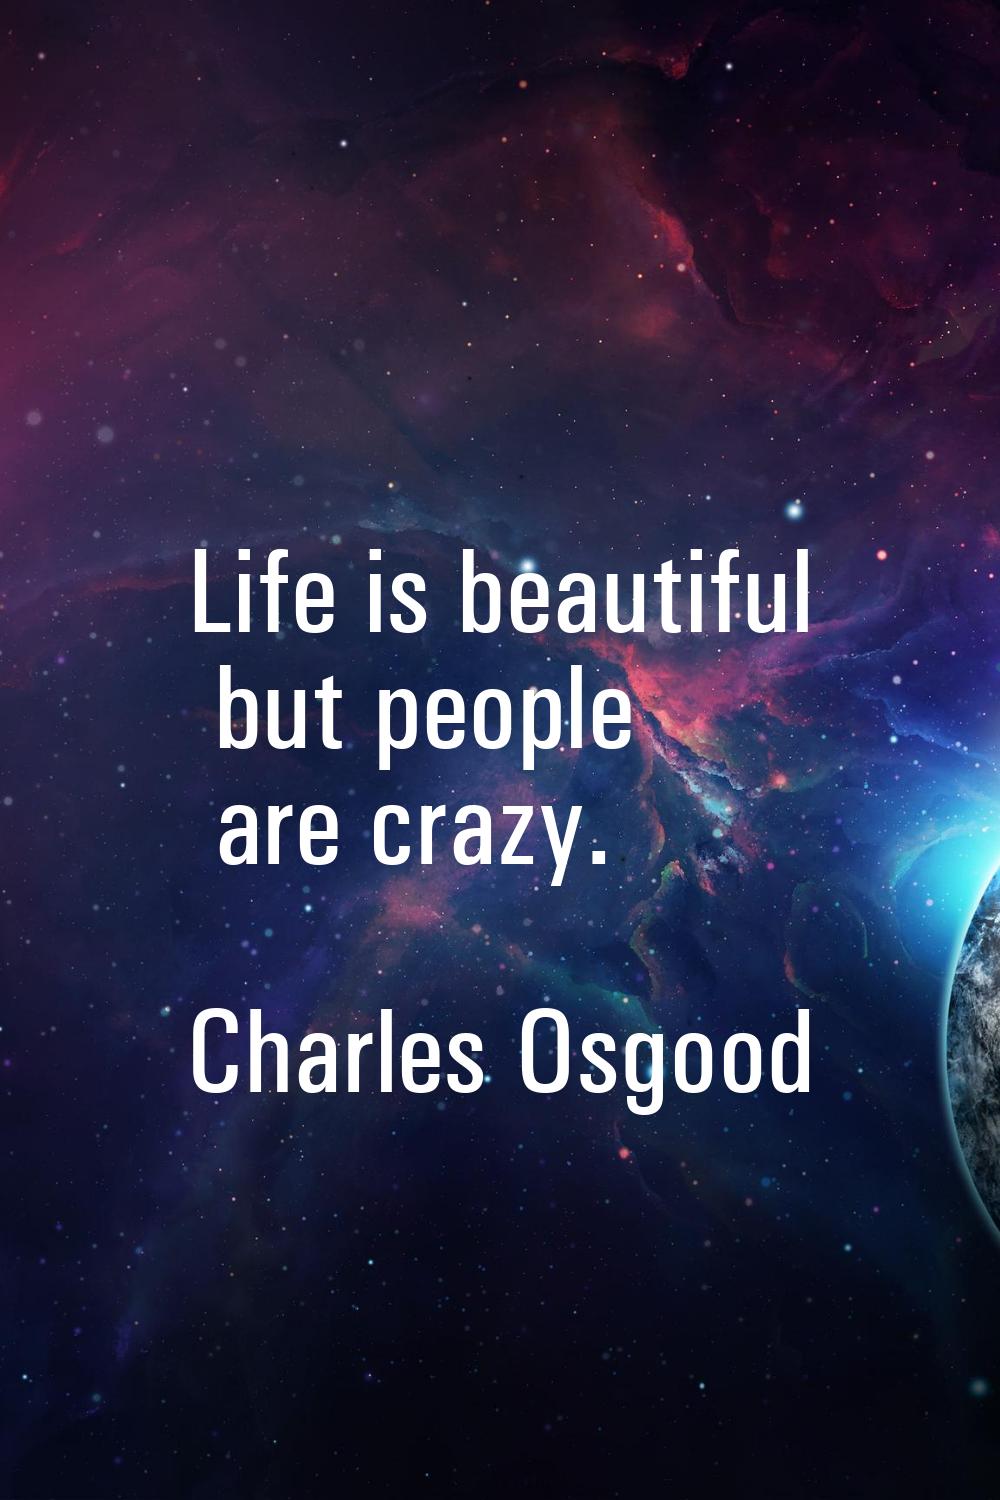 Life is beautiful but people are crazy.